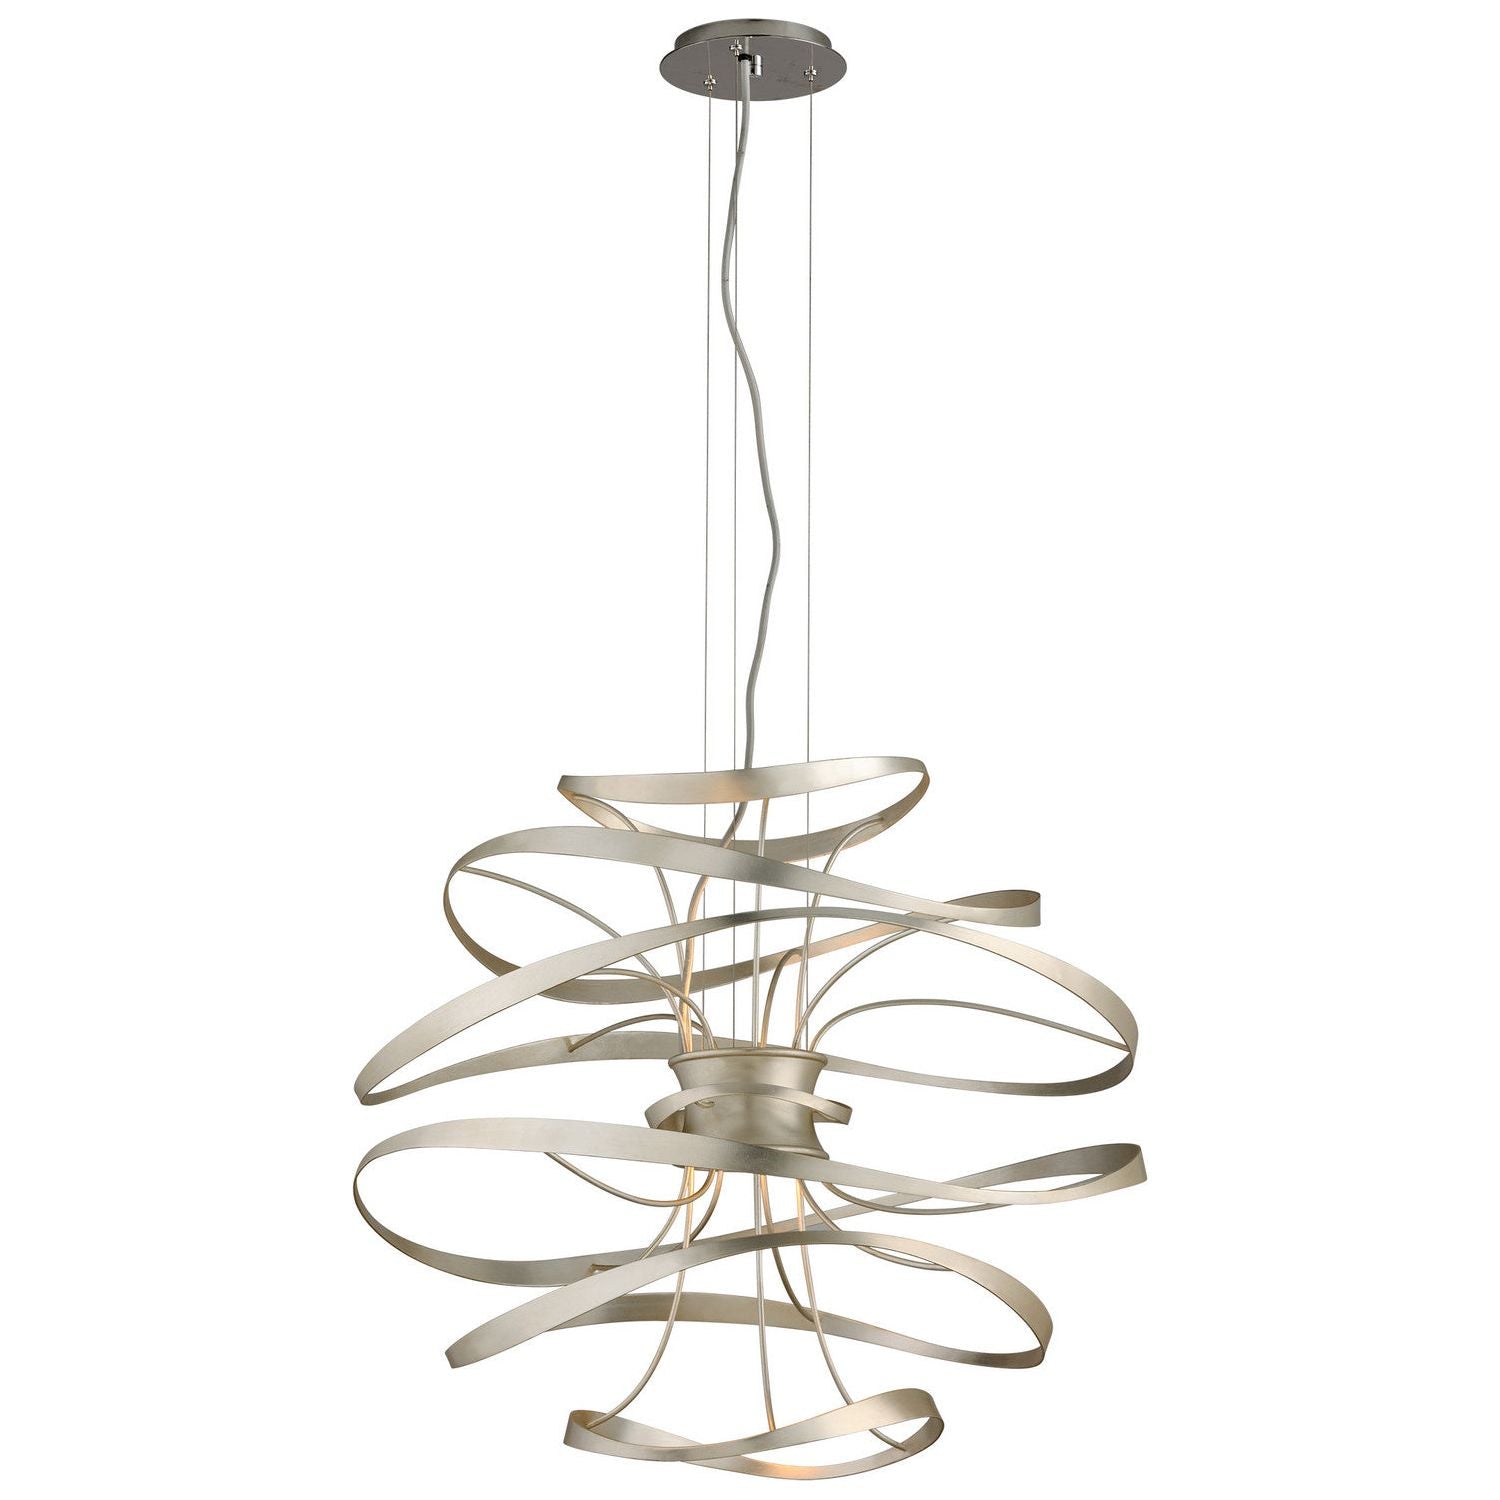 Corbett Lighting - 213-42-SL/SS - LED Chandelier - Calligraphy - Silver Leaf Polished Stainless